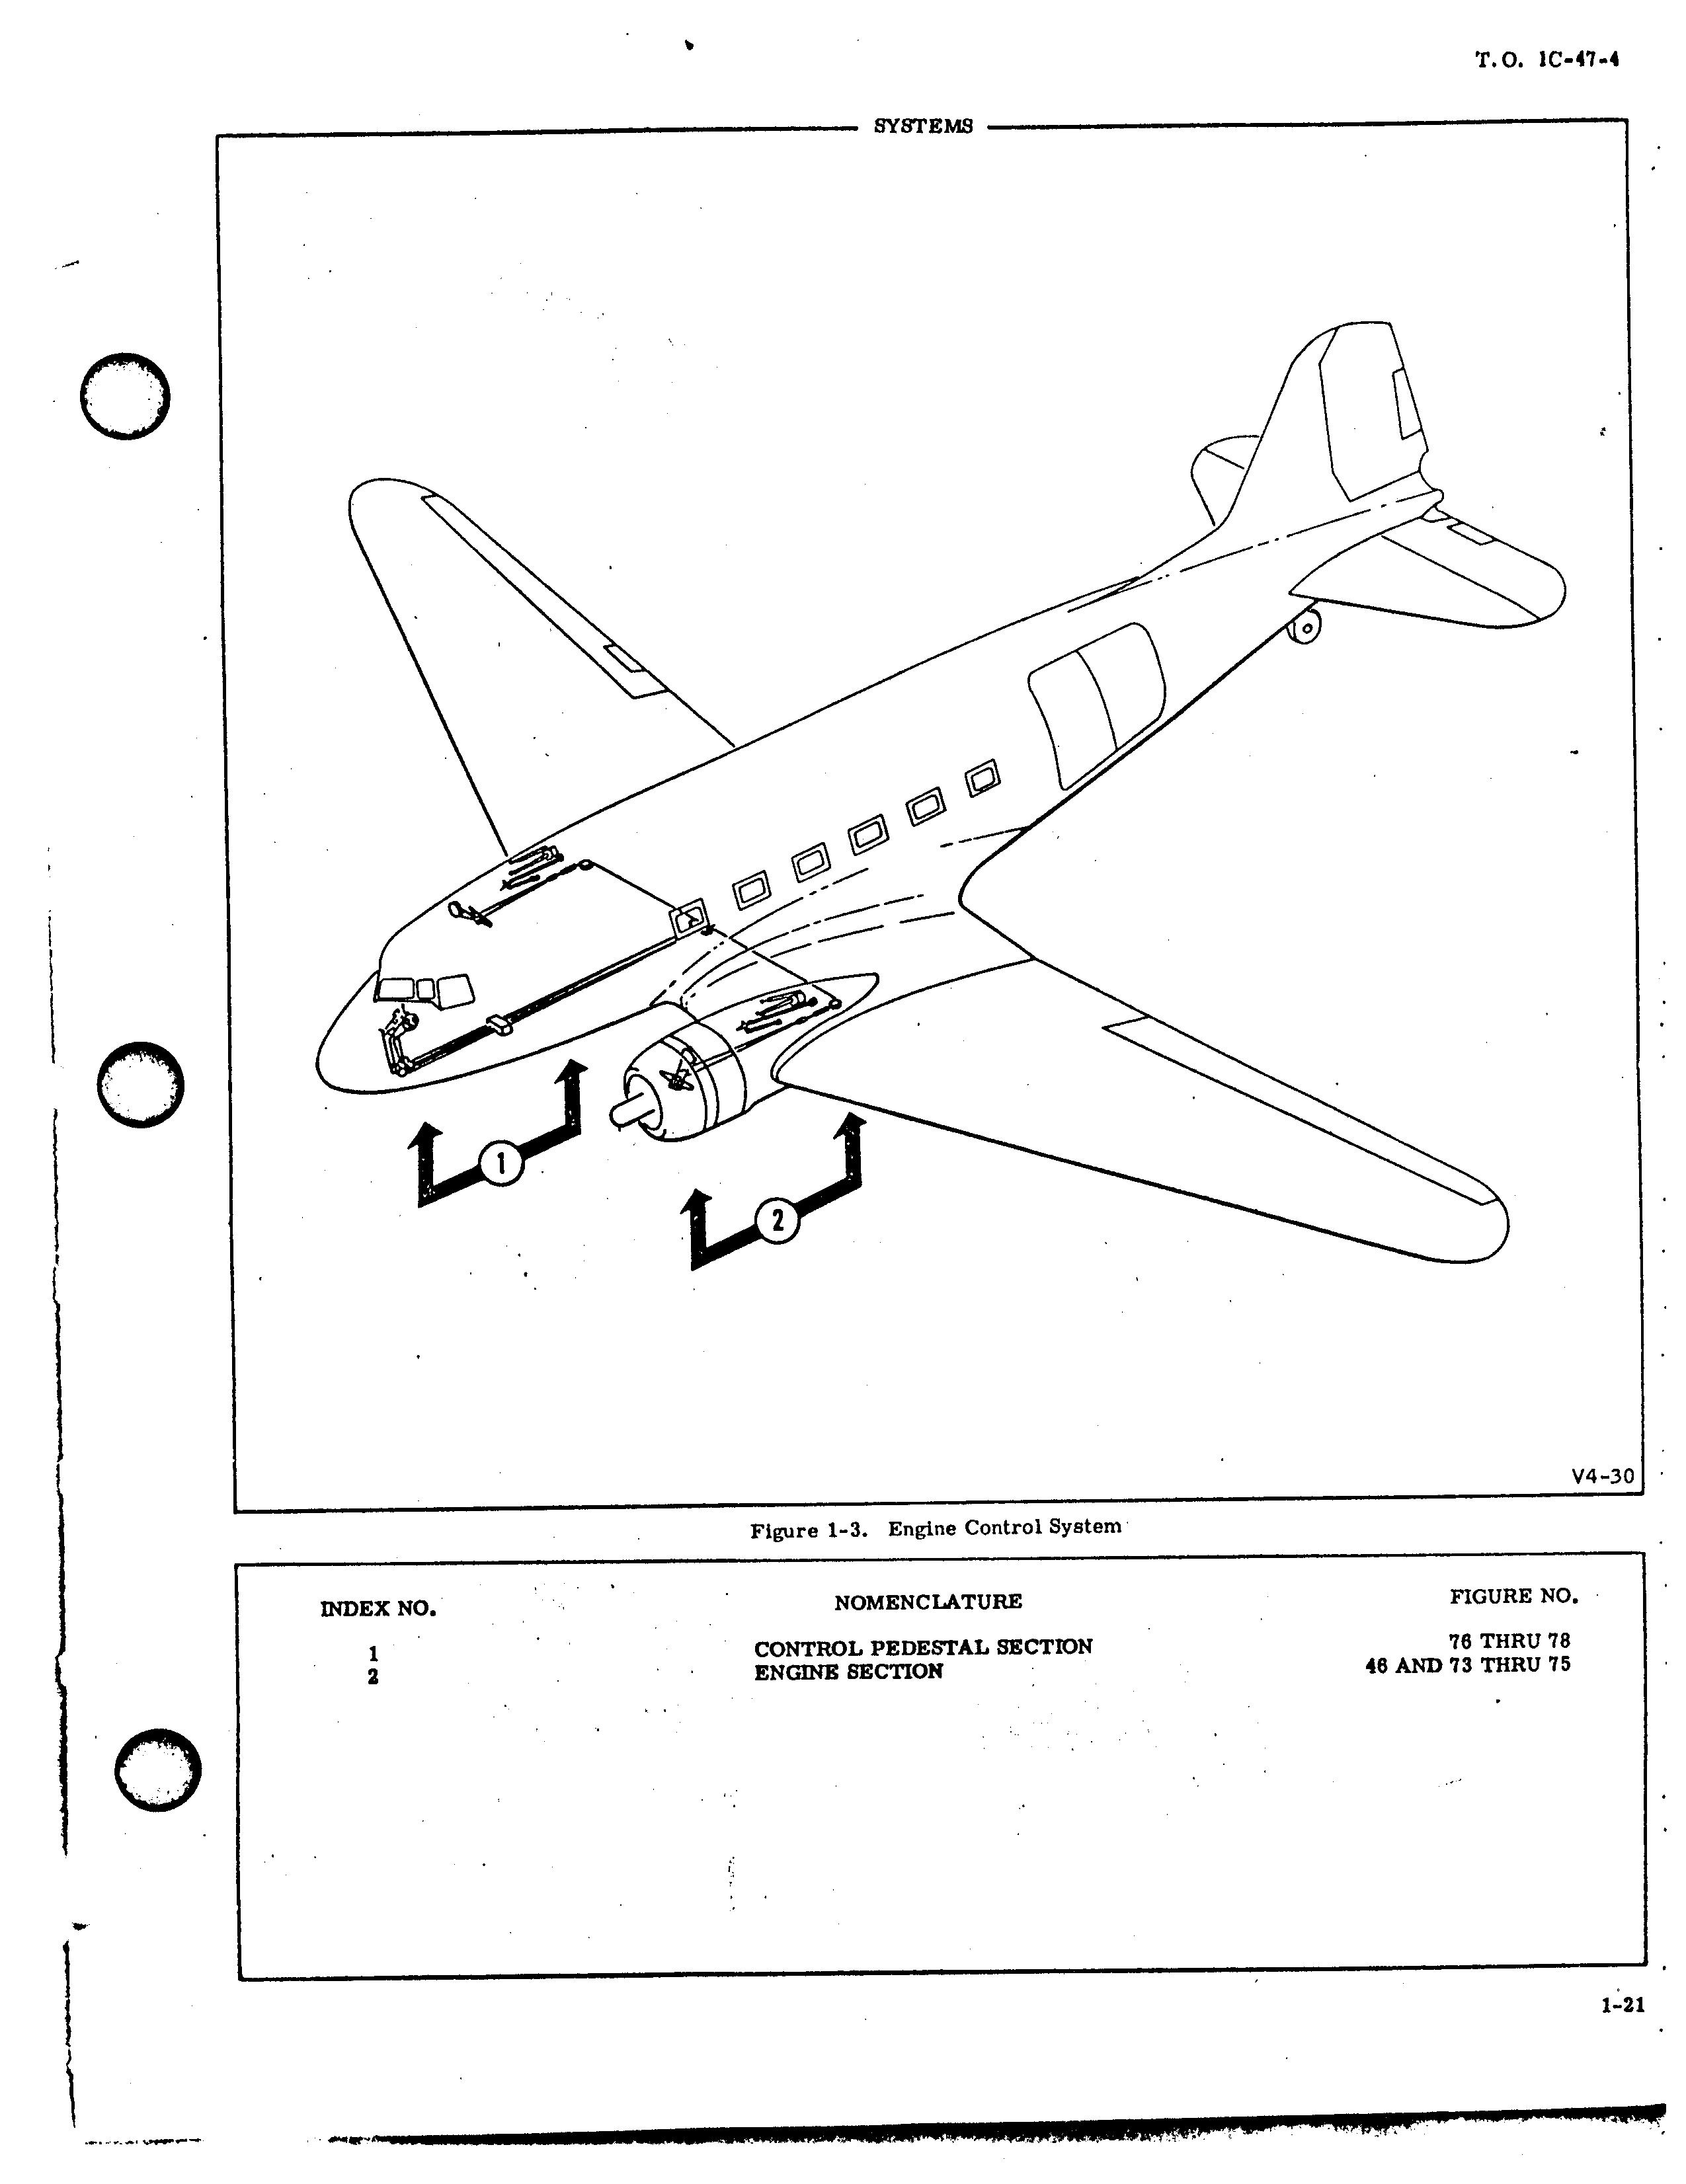 Sample page 35 from AirCorps Library document: Illustrated Parts Breakdown for C-47A, C-47B, C-47D, C-117A, and C-117B